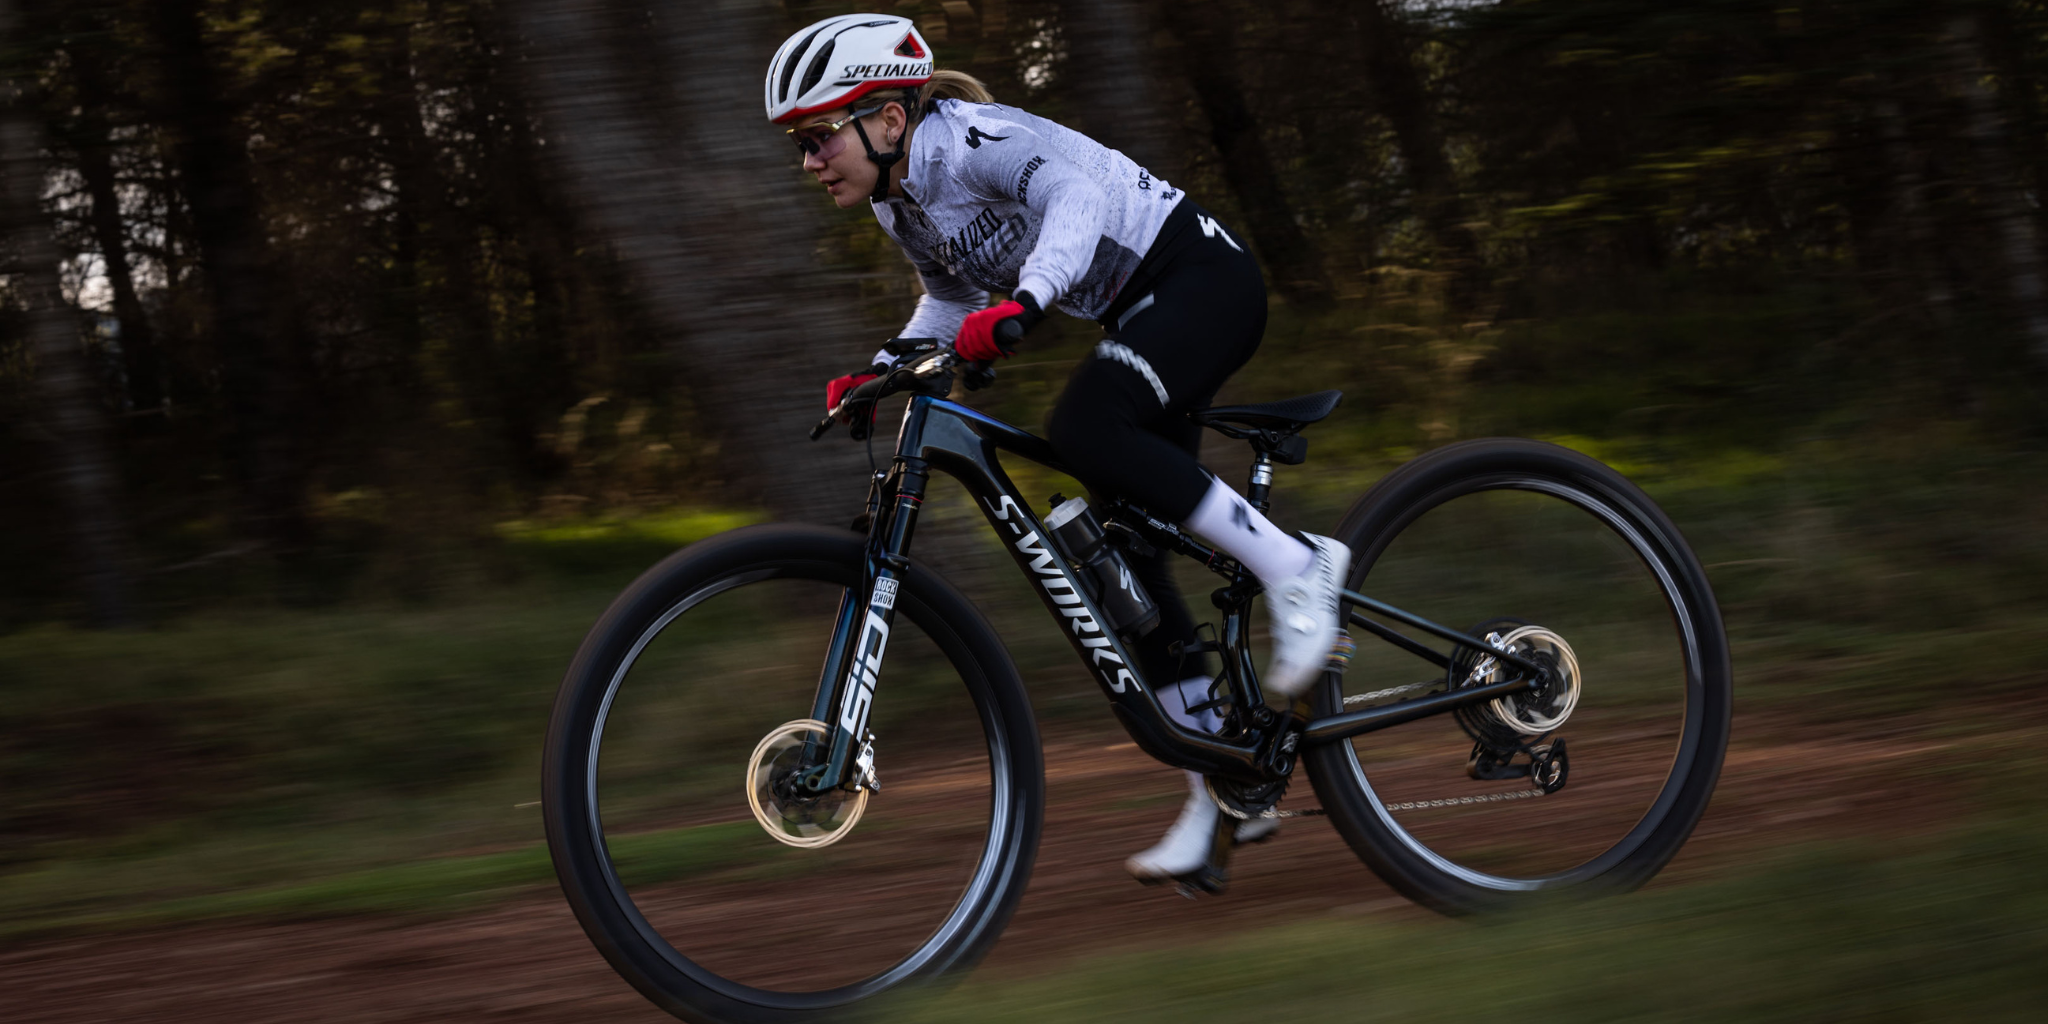 XC racing on a S-works pic 8